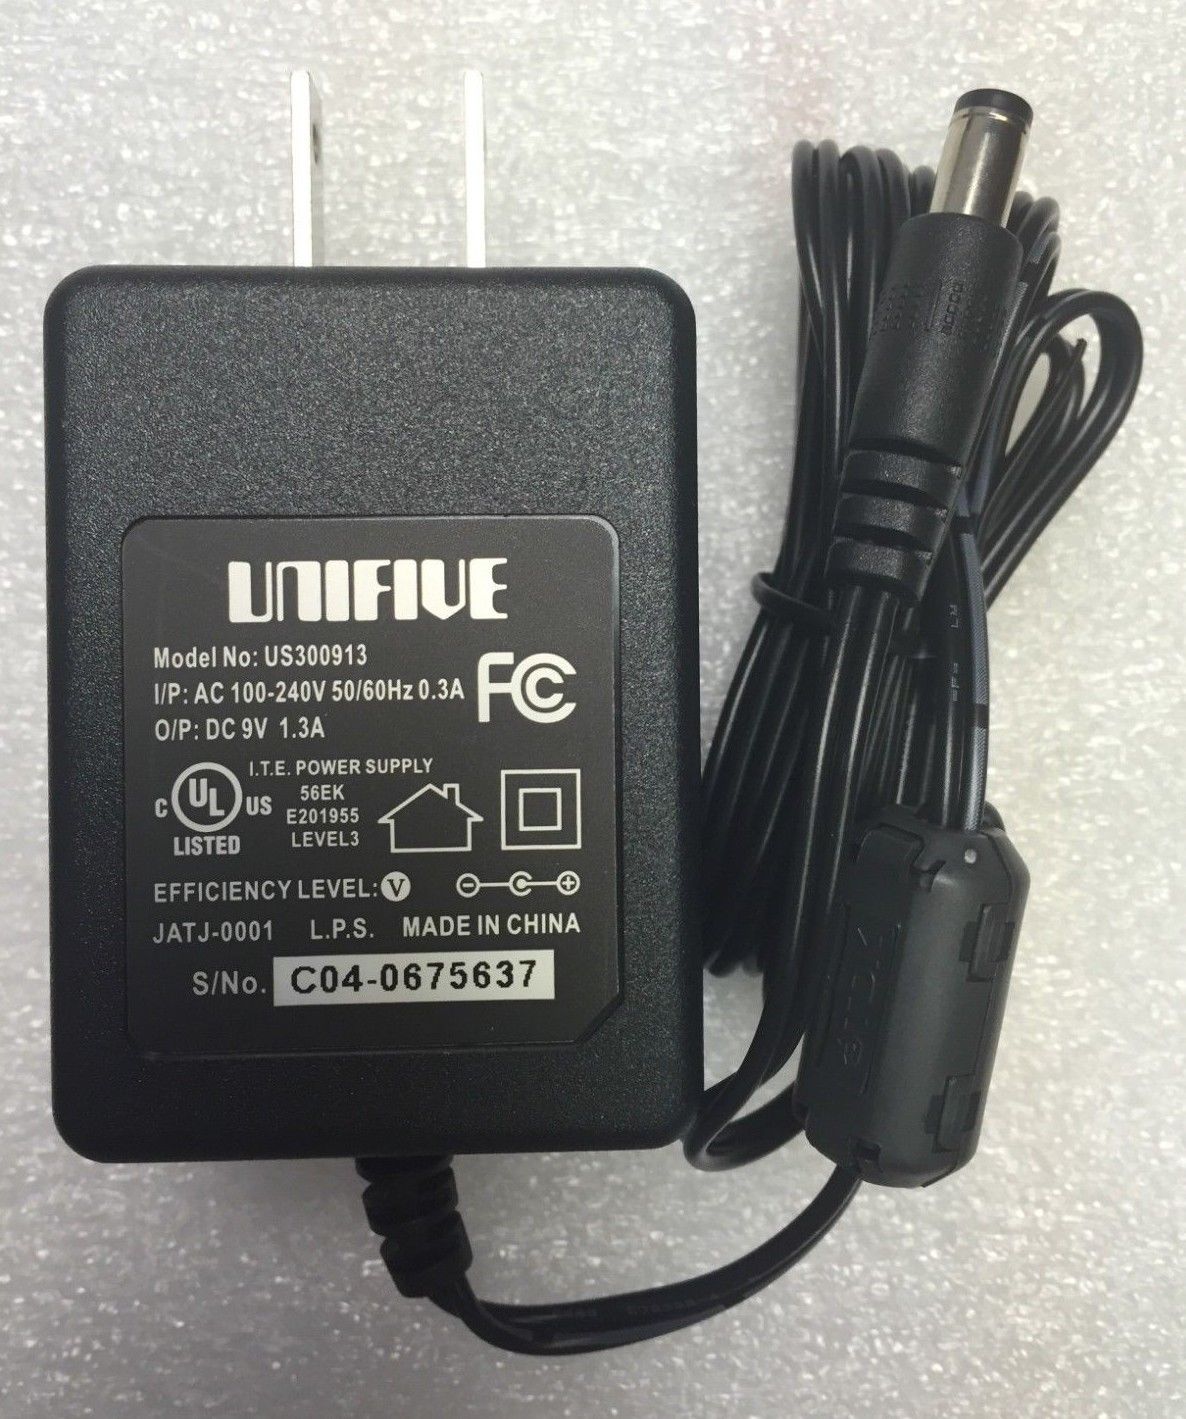 Brand New AC DC Adapter 9V 1.3A Unifive US300913 power adaptor